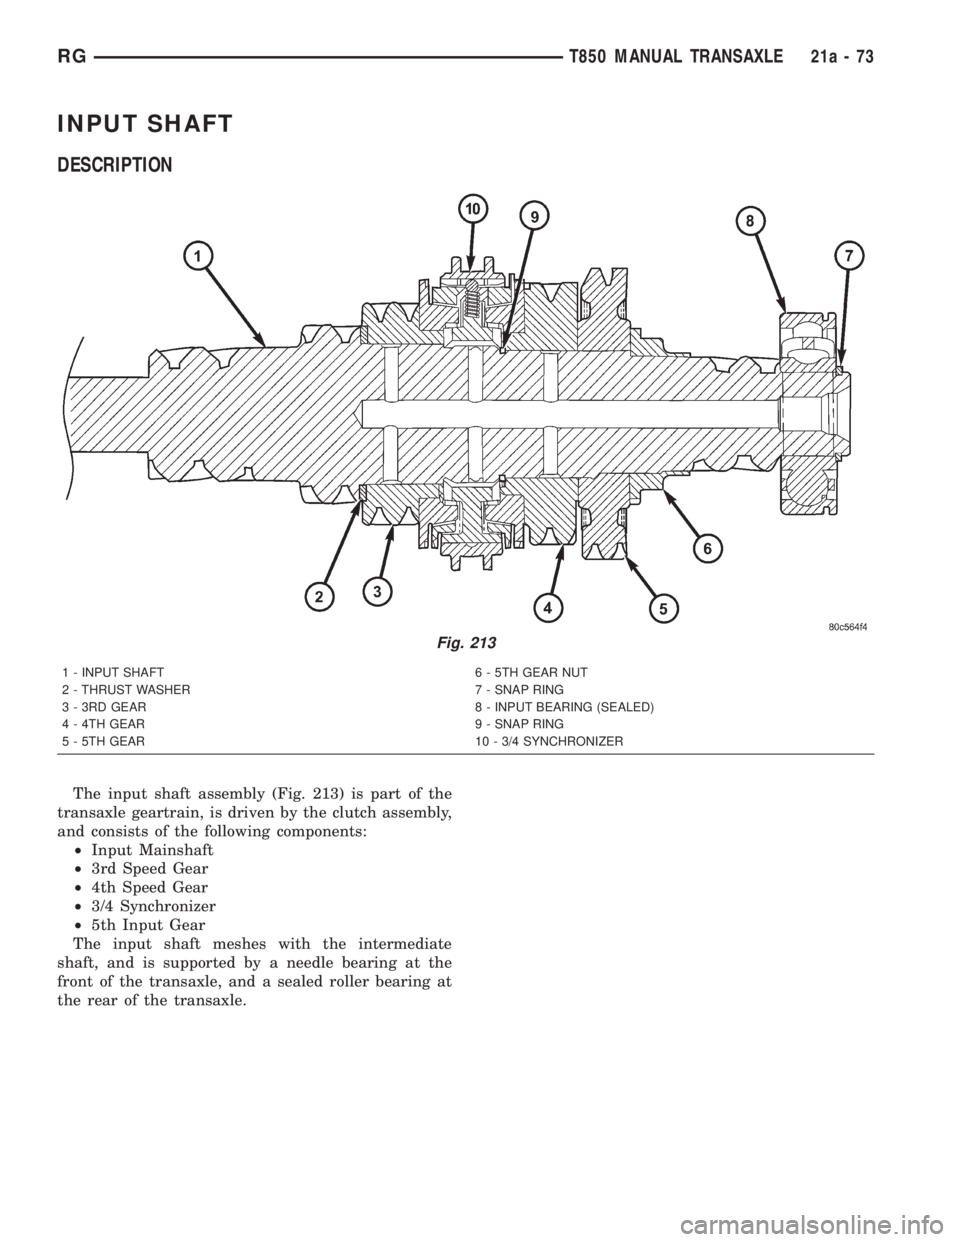 CHRYSLER VOYAGER 2001  Service Manual INPUT SHAFT
DESCRIPTION
The input shaft assembly (Fig. 213) is part of the
transaxle geartrain, is driven by the clutch assembly,
and consists of the following components:
²Input Mainshaft
²3rd Spee